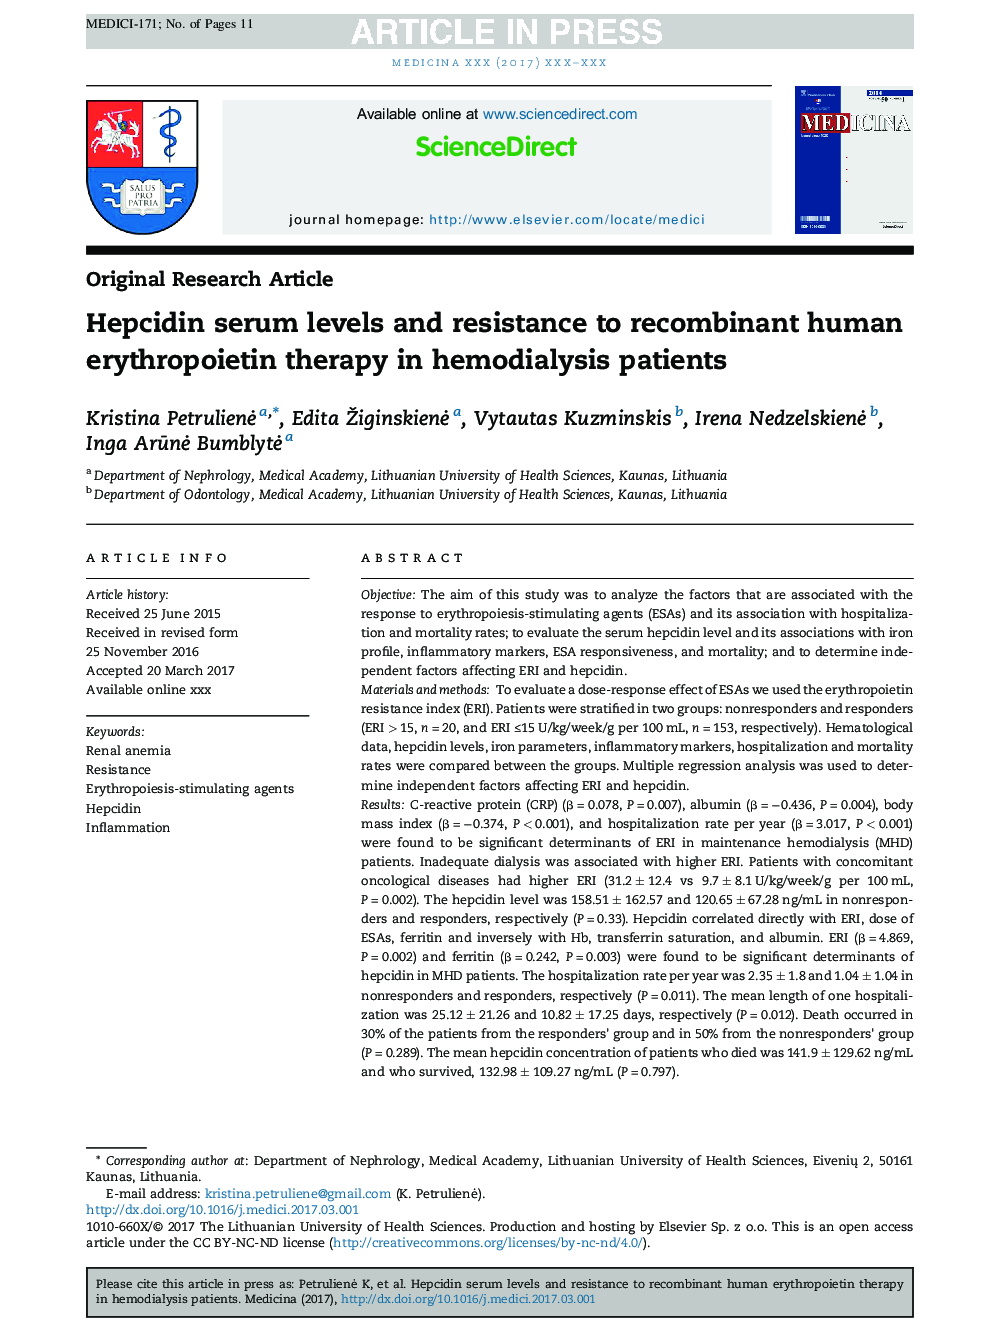 Hepcidin serum levels and resistance to recombinant human erythropoietin therapy in hemodialysis patients